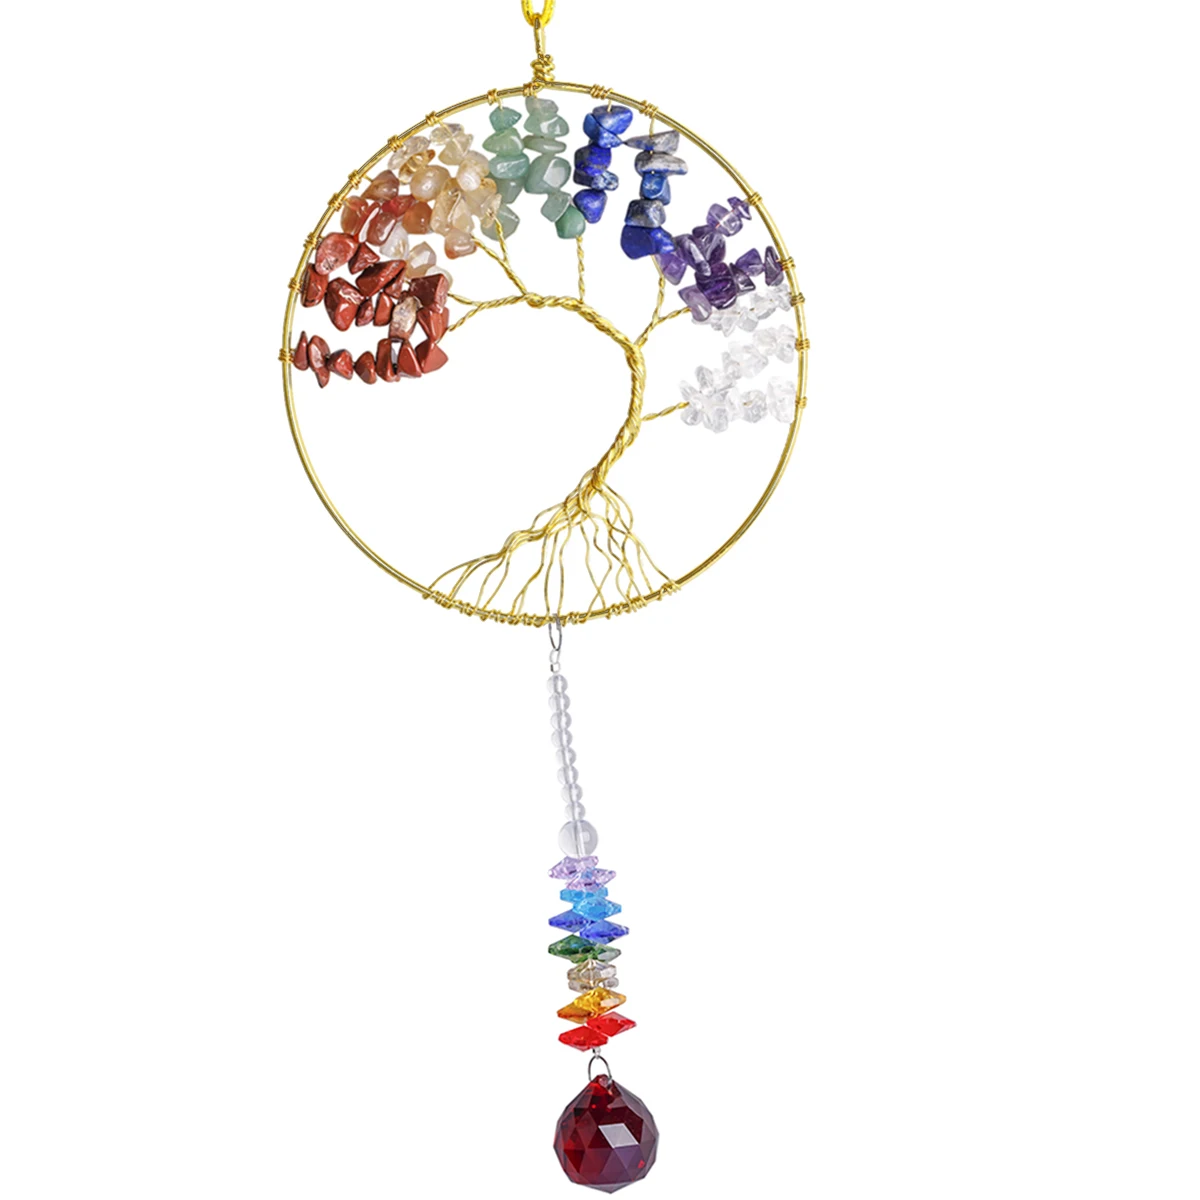 Tree Of Life Crystal Point Prism Glass Pendant Wind Chimes Natural 7 Chakra Stone Hanging Ornaments For Wall Window Home Decor